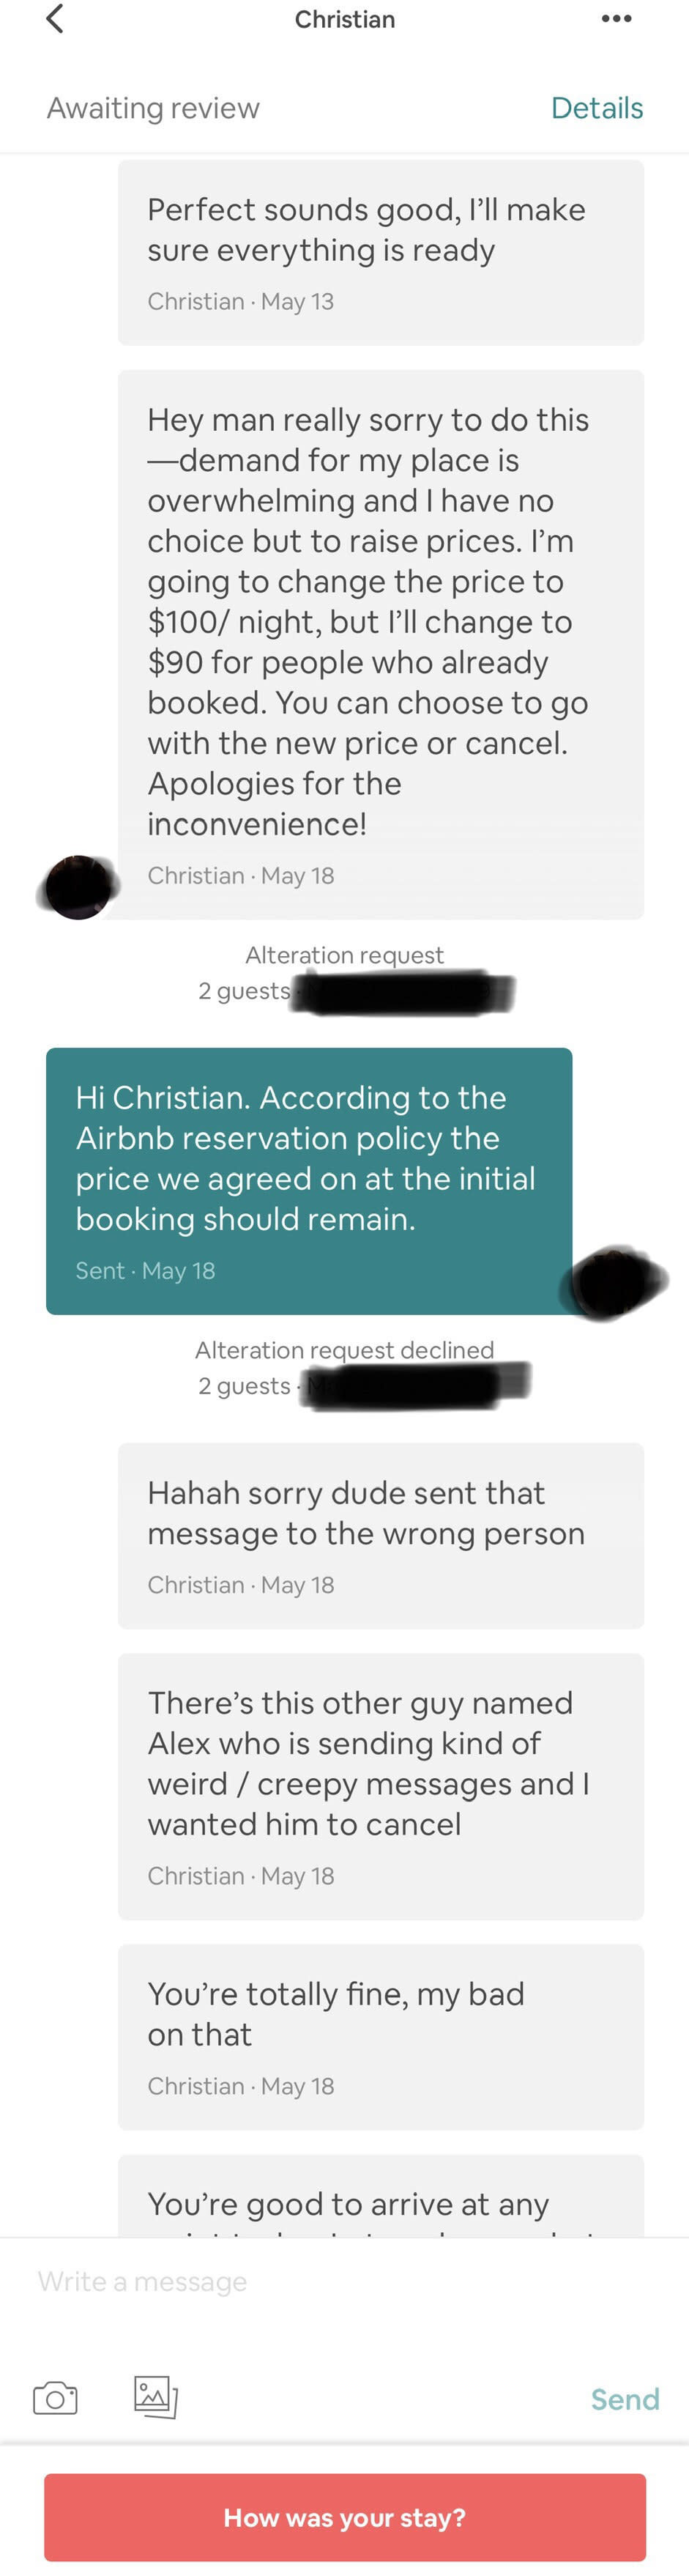 Person says they have to raise the price from $90/night to $100 because of demand, and when other person says that according to Airbnb policy, the original booking price should remain, they say my bad and they sent it to the wrong person